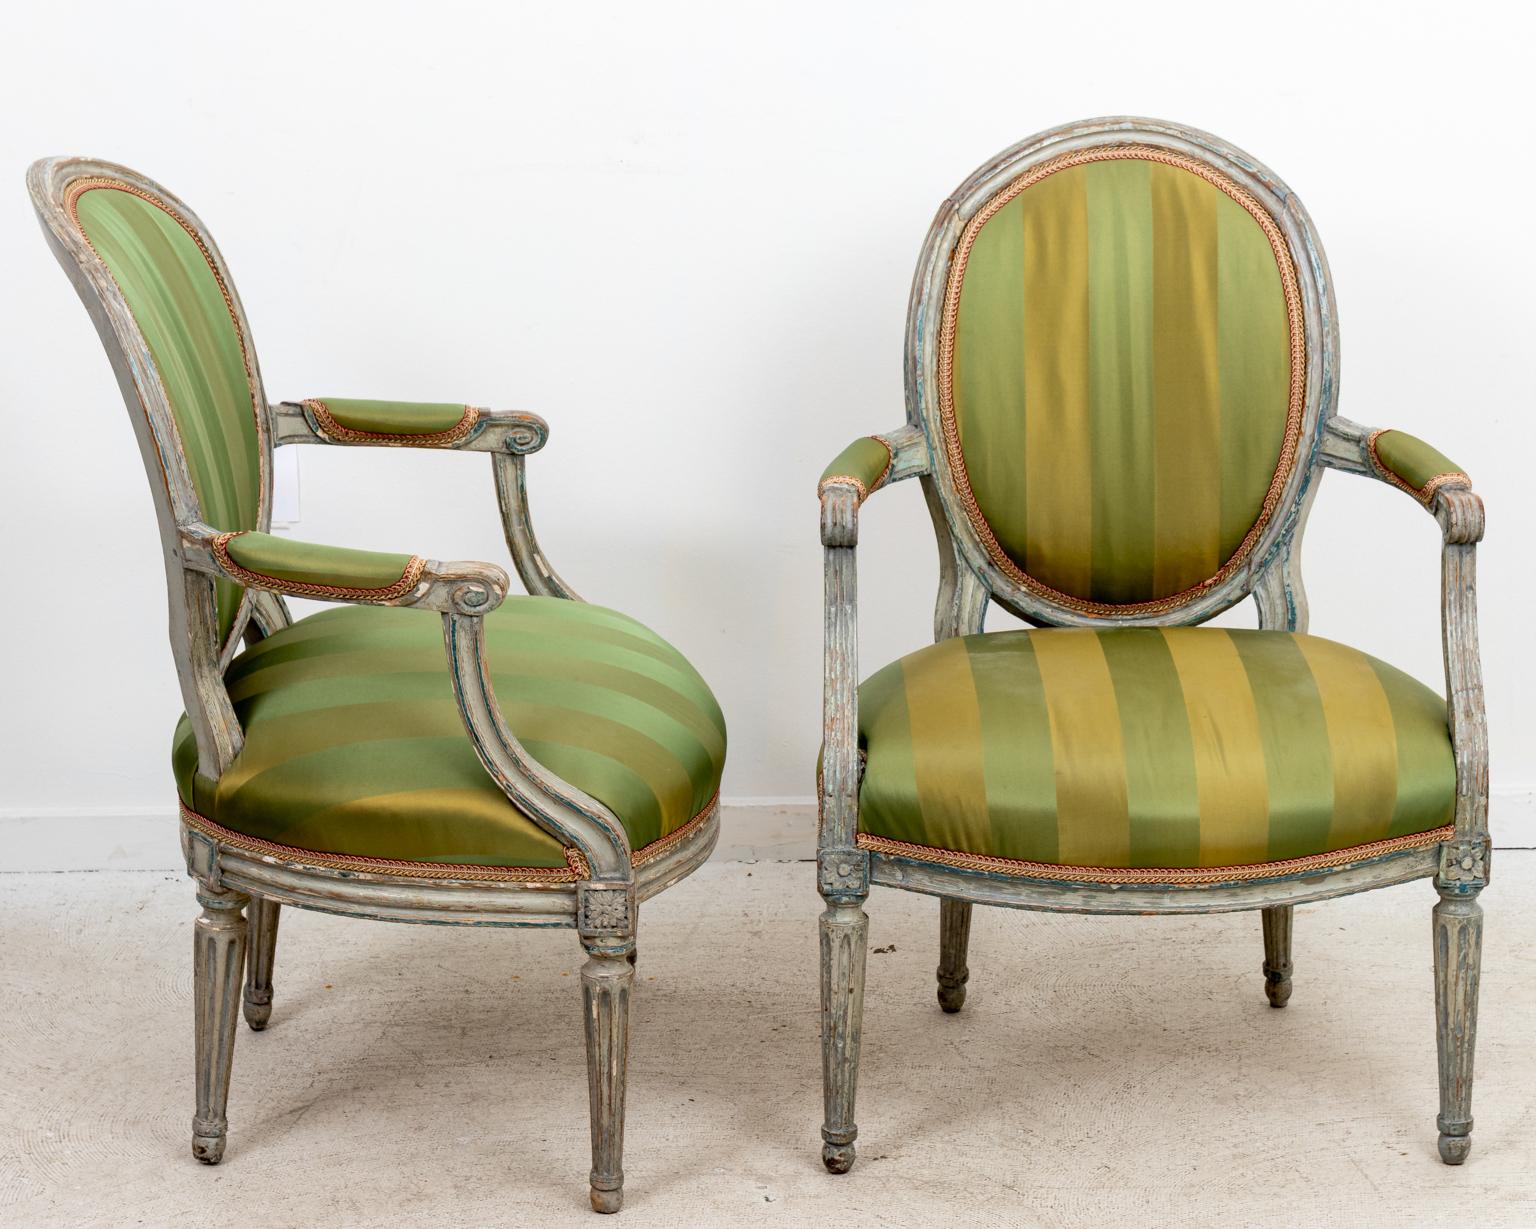 Circa 18th century pair of Louis XV style rounded back armchairs with upholstered seats and turned legs. Please note of wear consistent with age including distressed finish and paint loss to the wood frame.